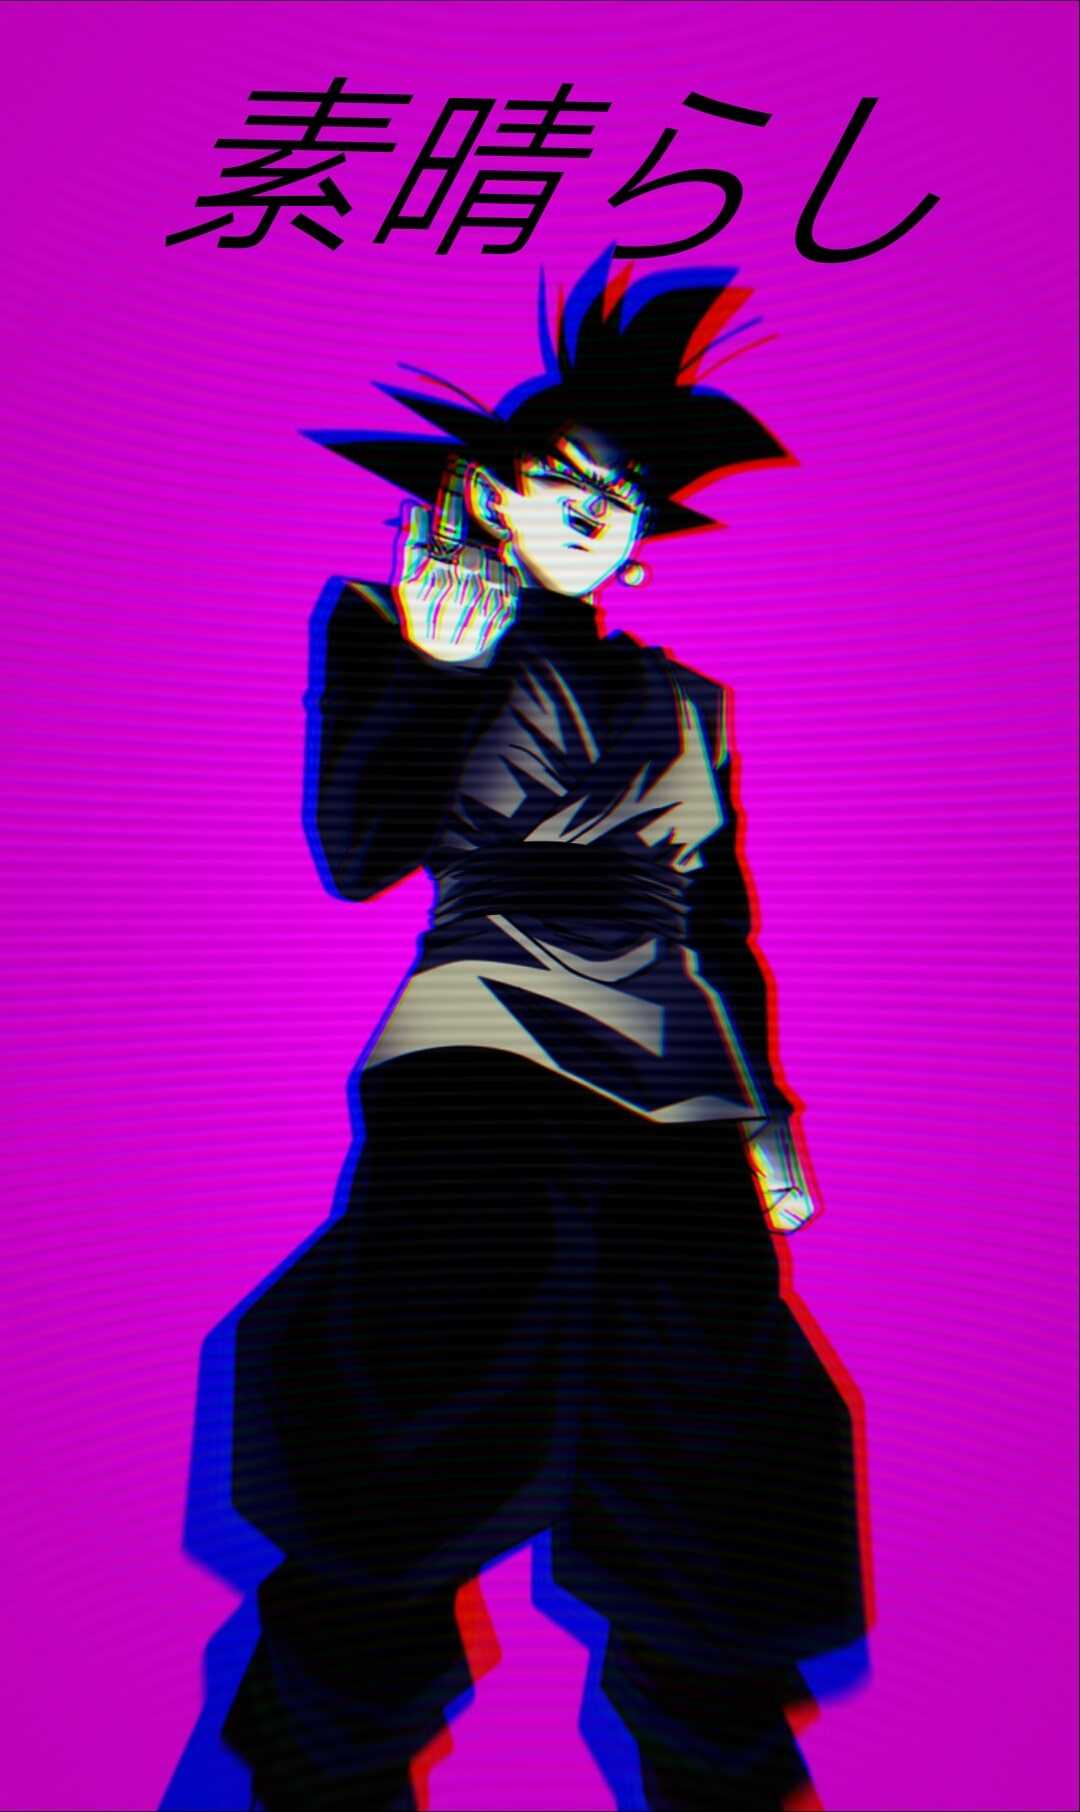 1080x1920 Resolution Black Goku  Trunks Dragon Ball Super Iphone 7 6s 6  Plus and Pixel XL One Plus 3 3t 5 Wallpaper  Wallpapers Den